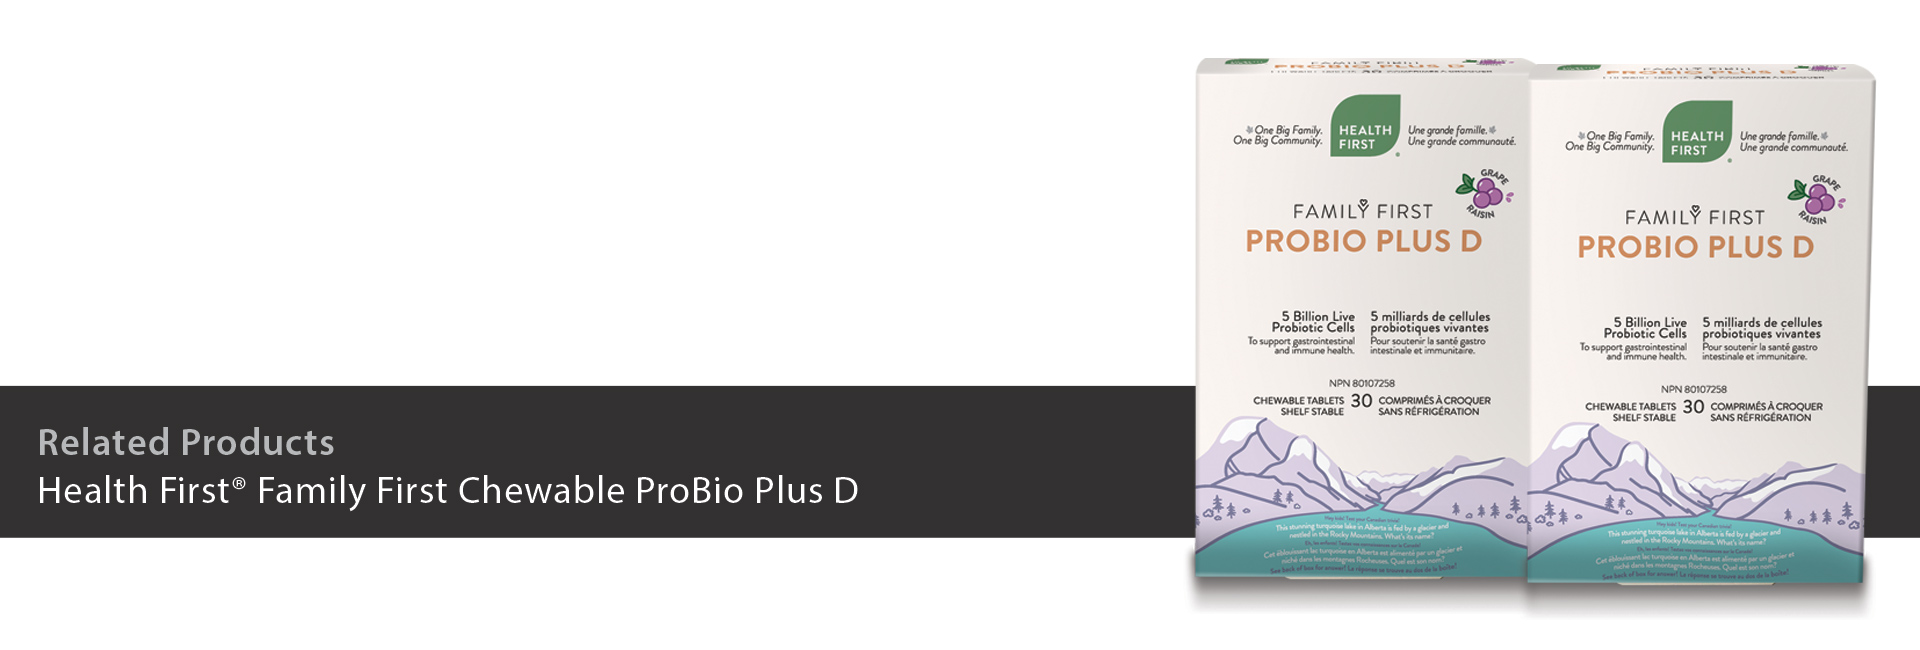 Health First Family First Chewable ProBio Plus D